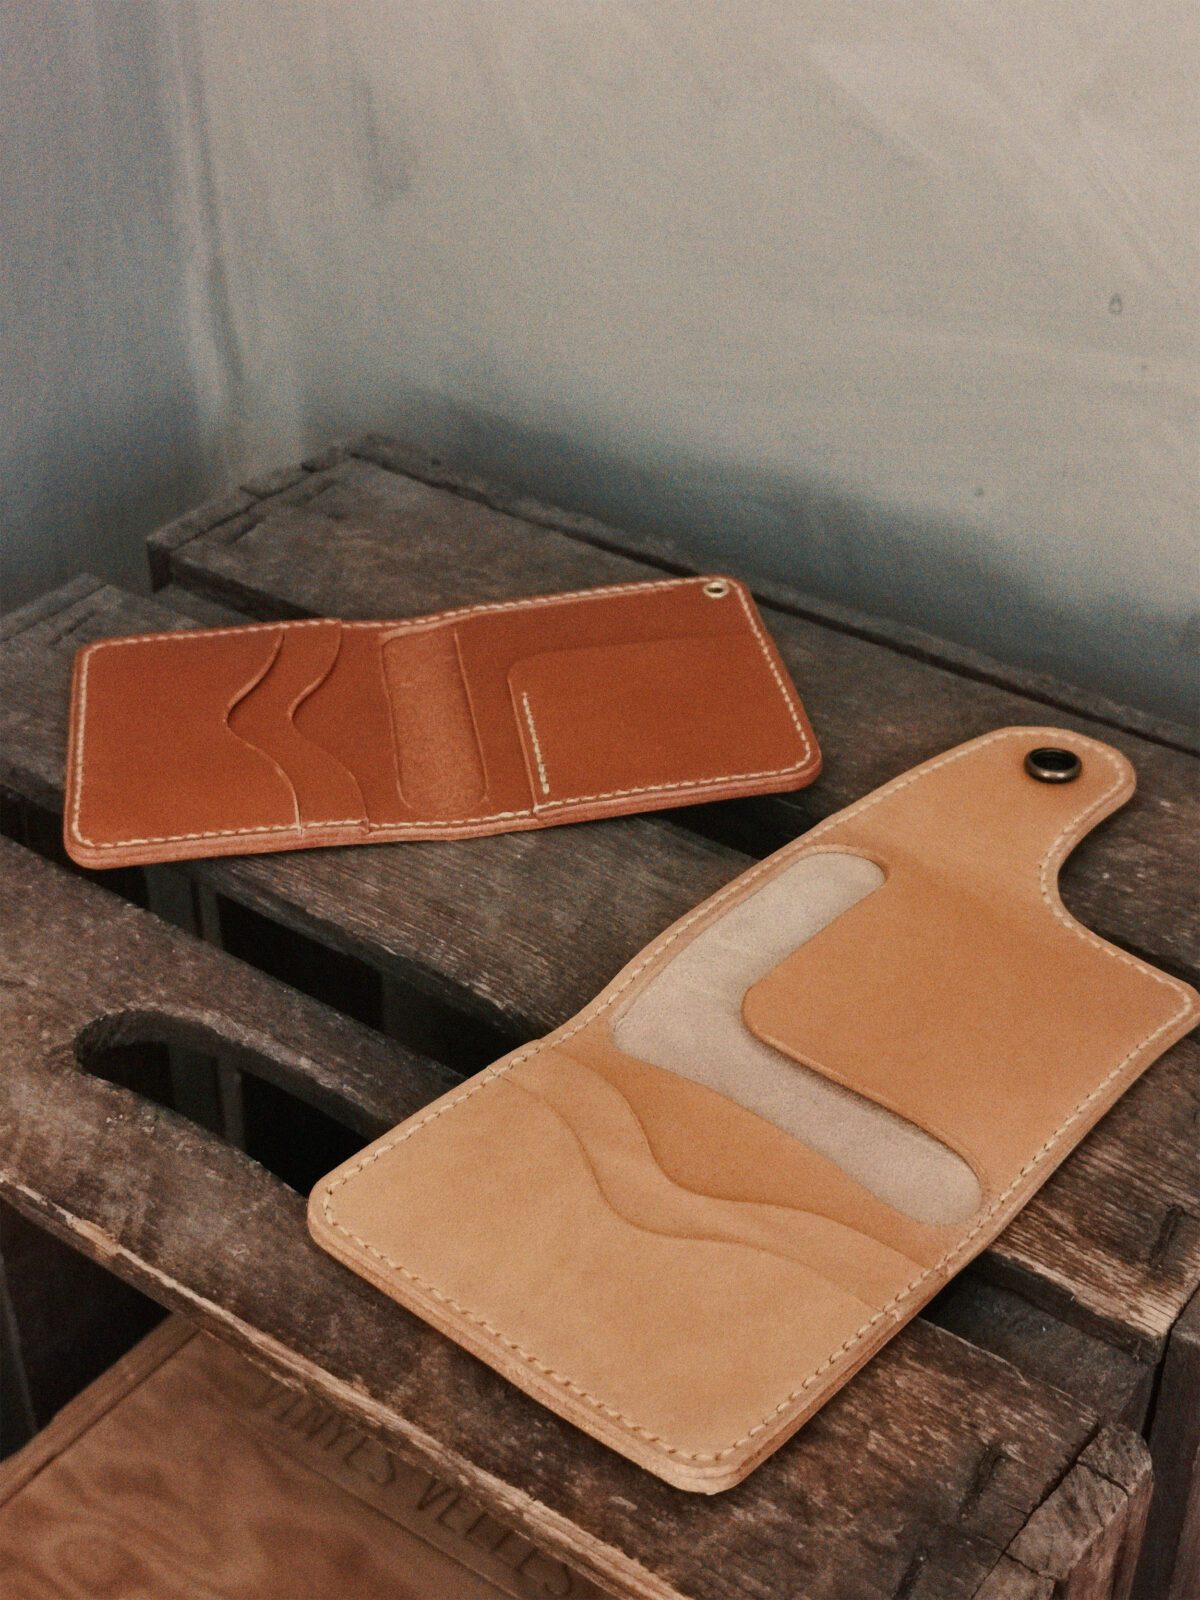 Handcrafted leather wallets